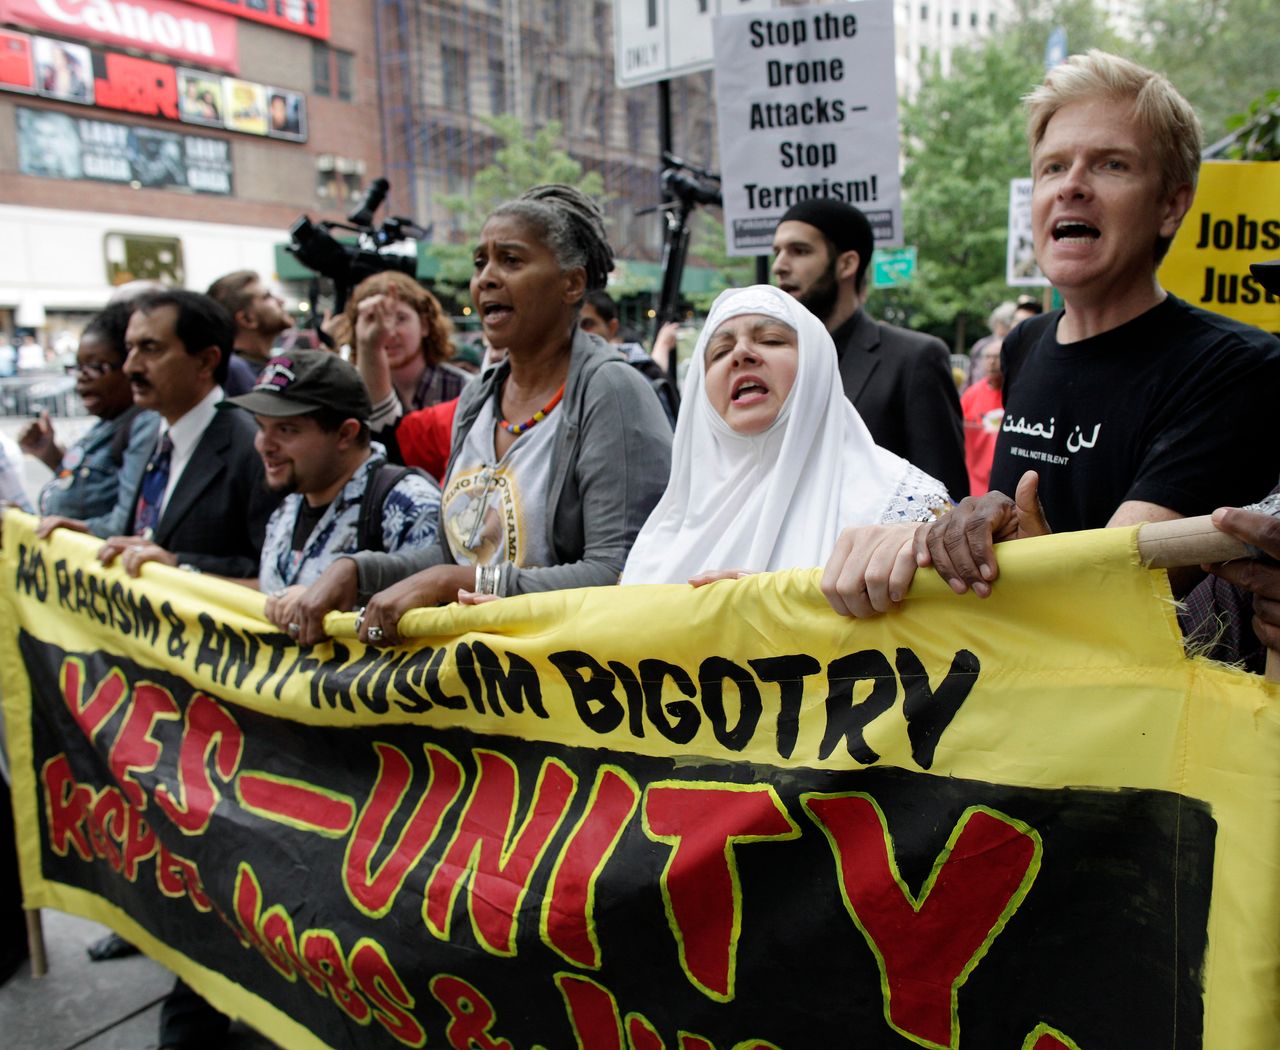 Protesters march in the Rally Against War, Racism & Islamophobia to mark the 10th anniversary of the 9/11 attacks on the World Trade Center, in New York City.